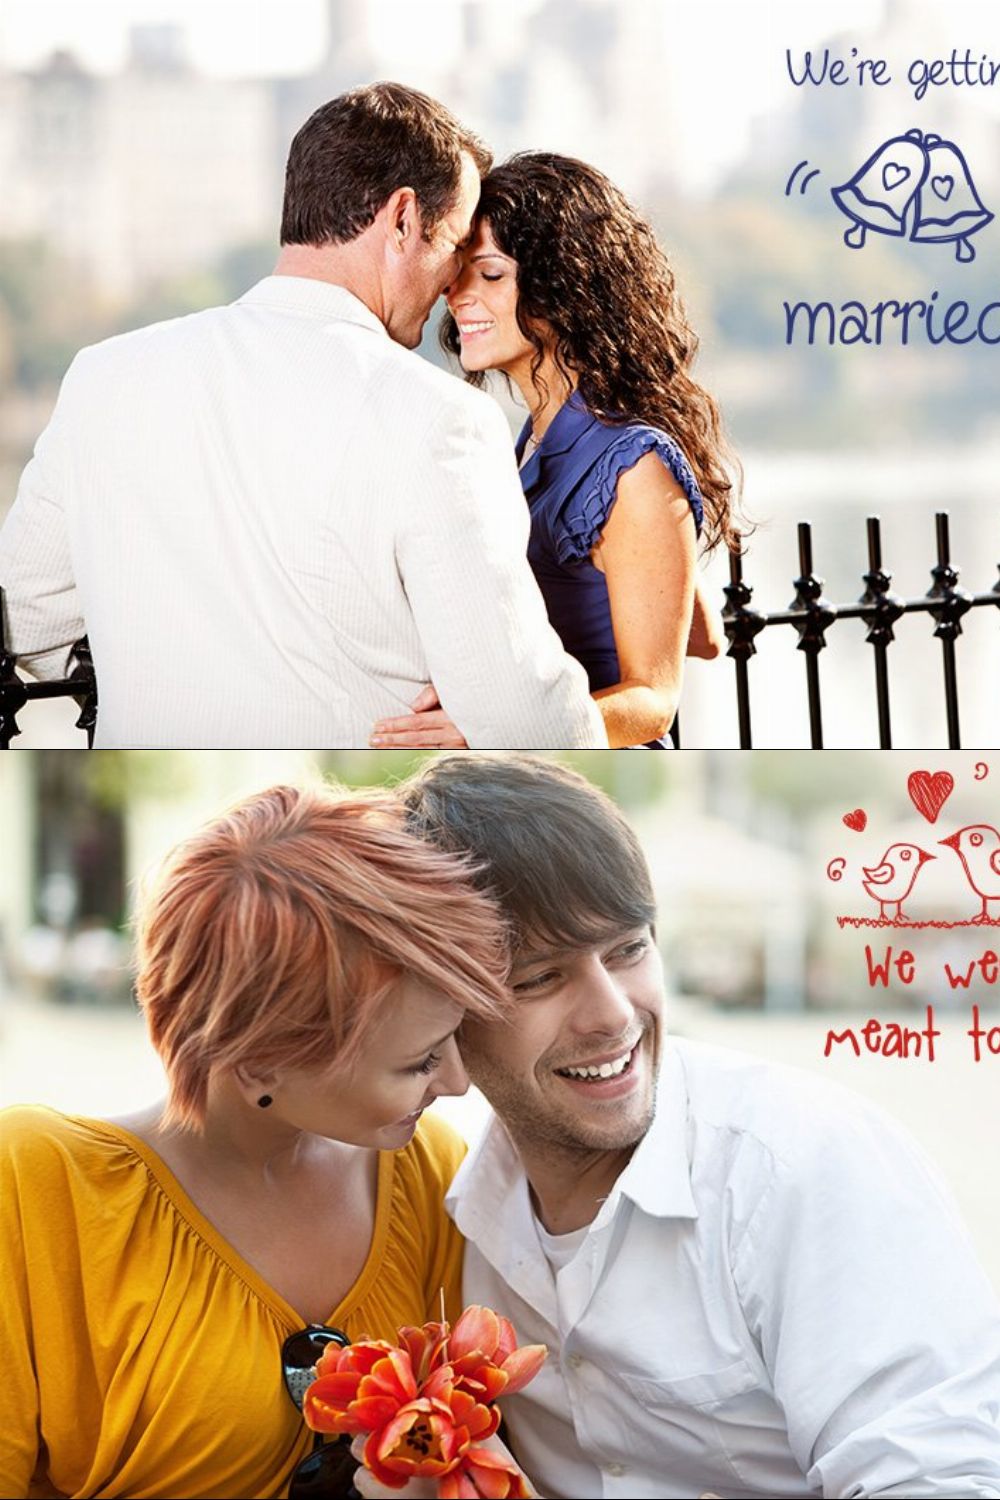 Engagement Photo Overlays pinterest preview image.